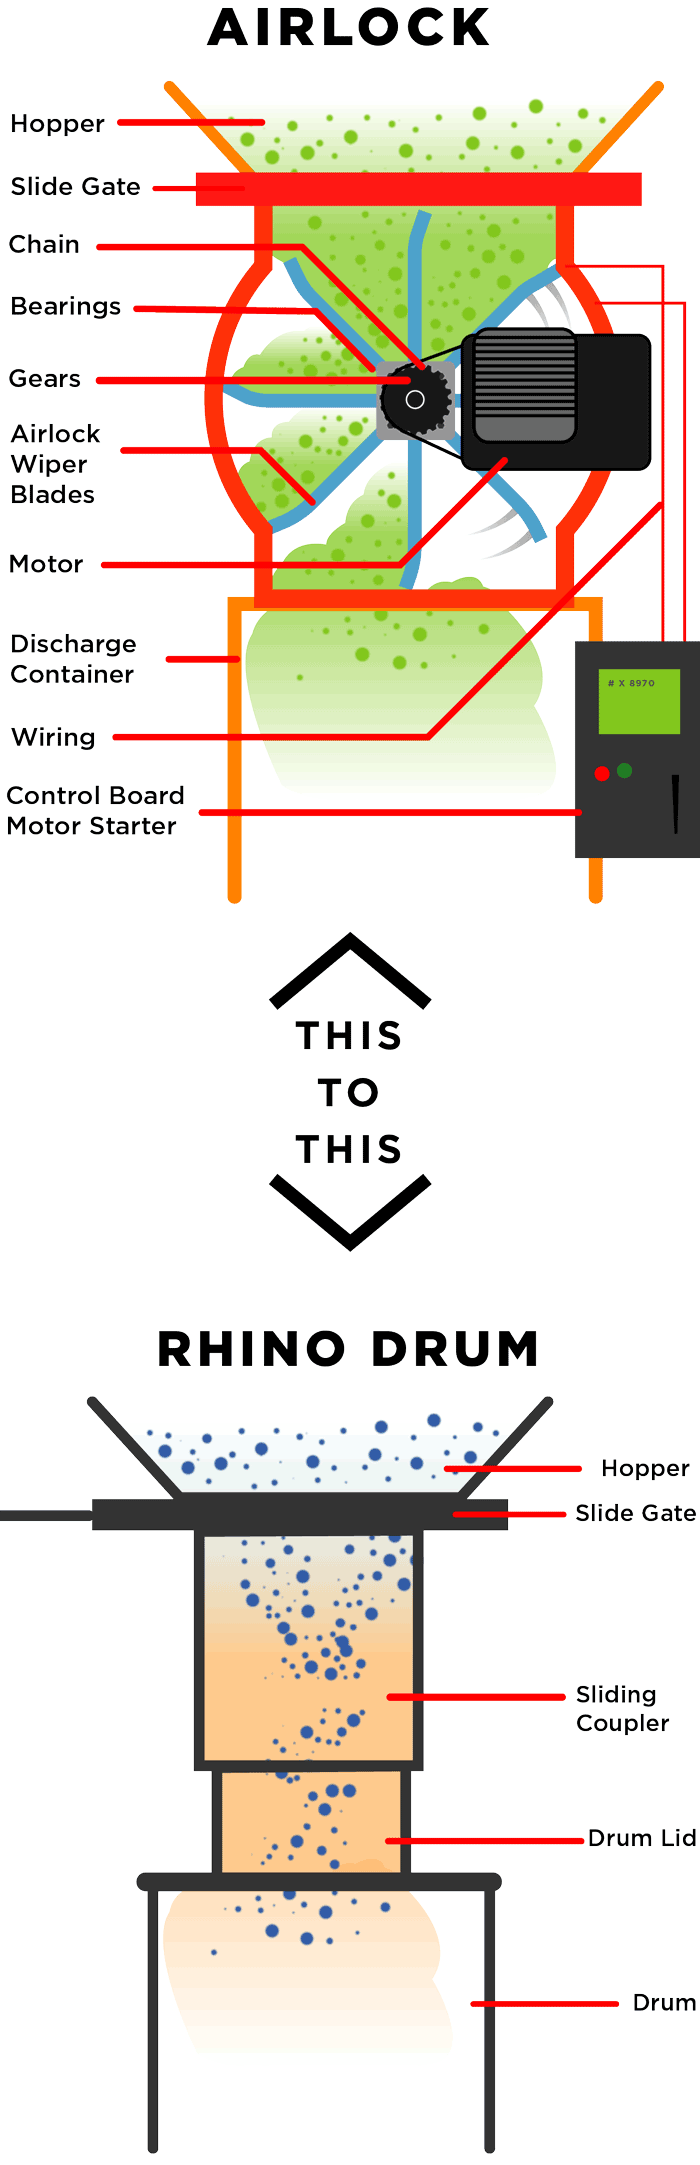 Comparison of multiple airlock parts to simple and few Rhino Drum components